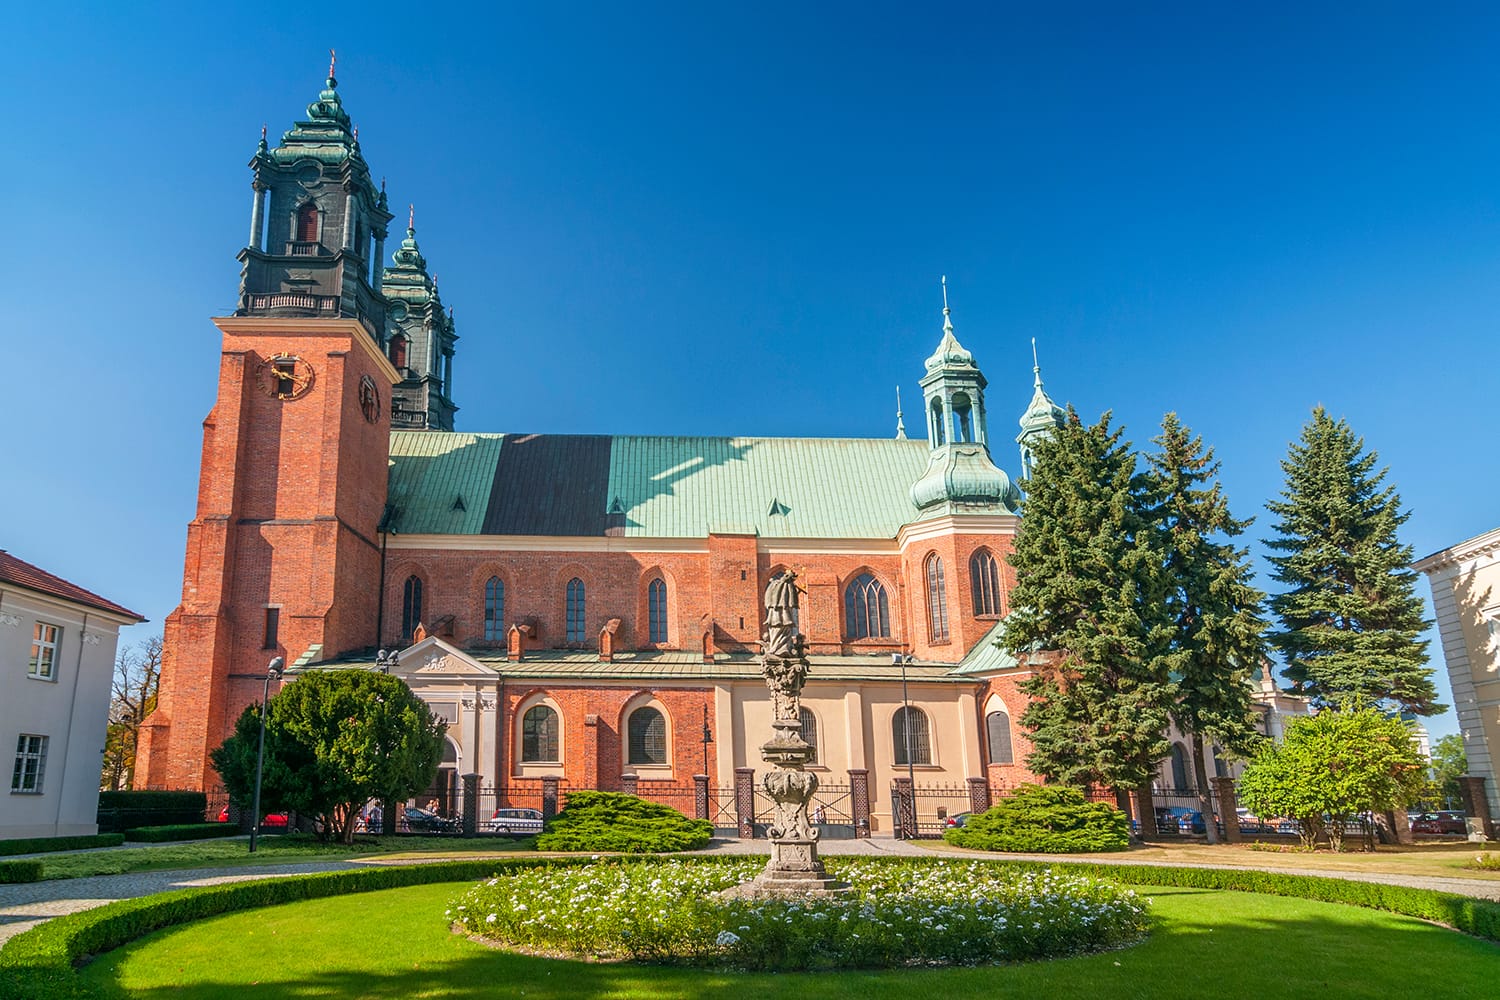 Saint Peter and Paul Archicathedral Basilica on Ostrow Tumski island in Poznan, Poland.